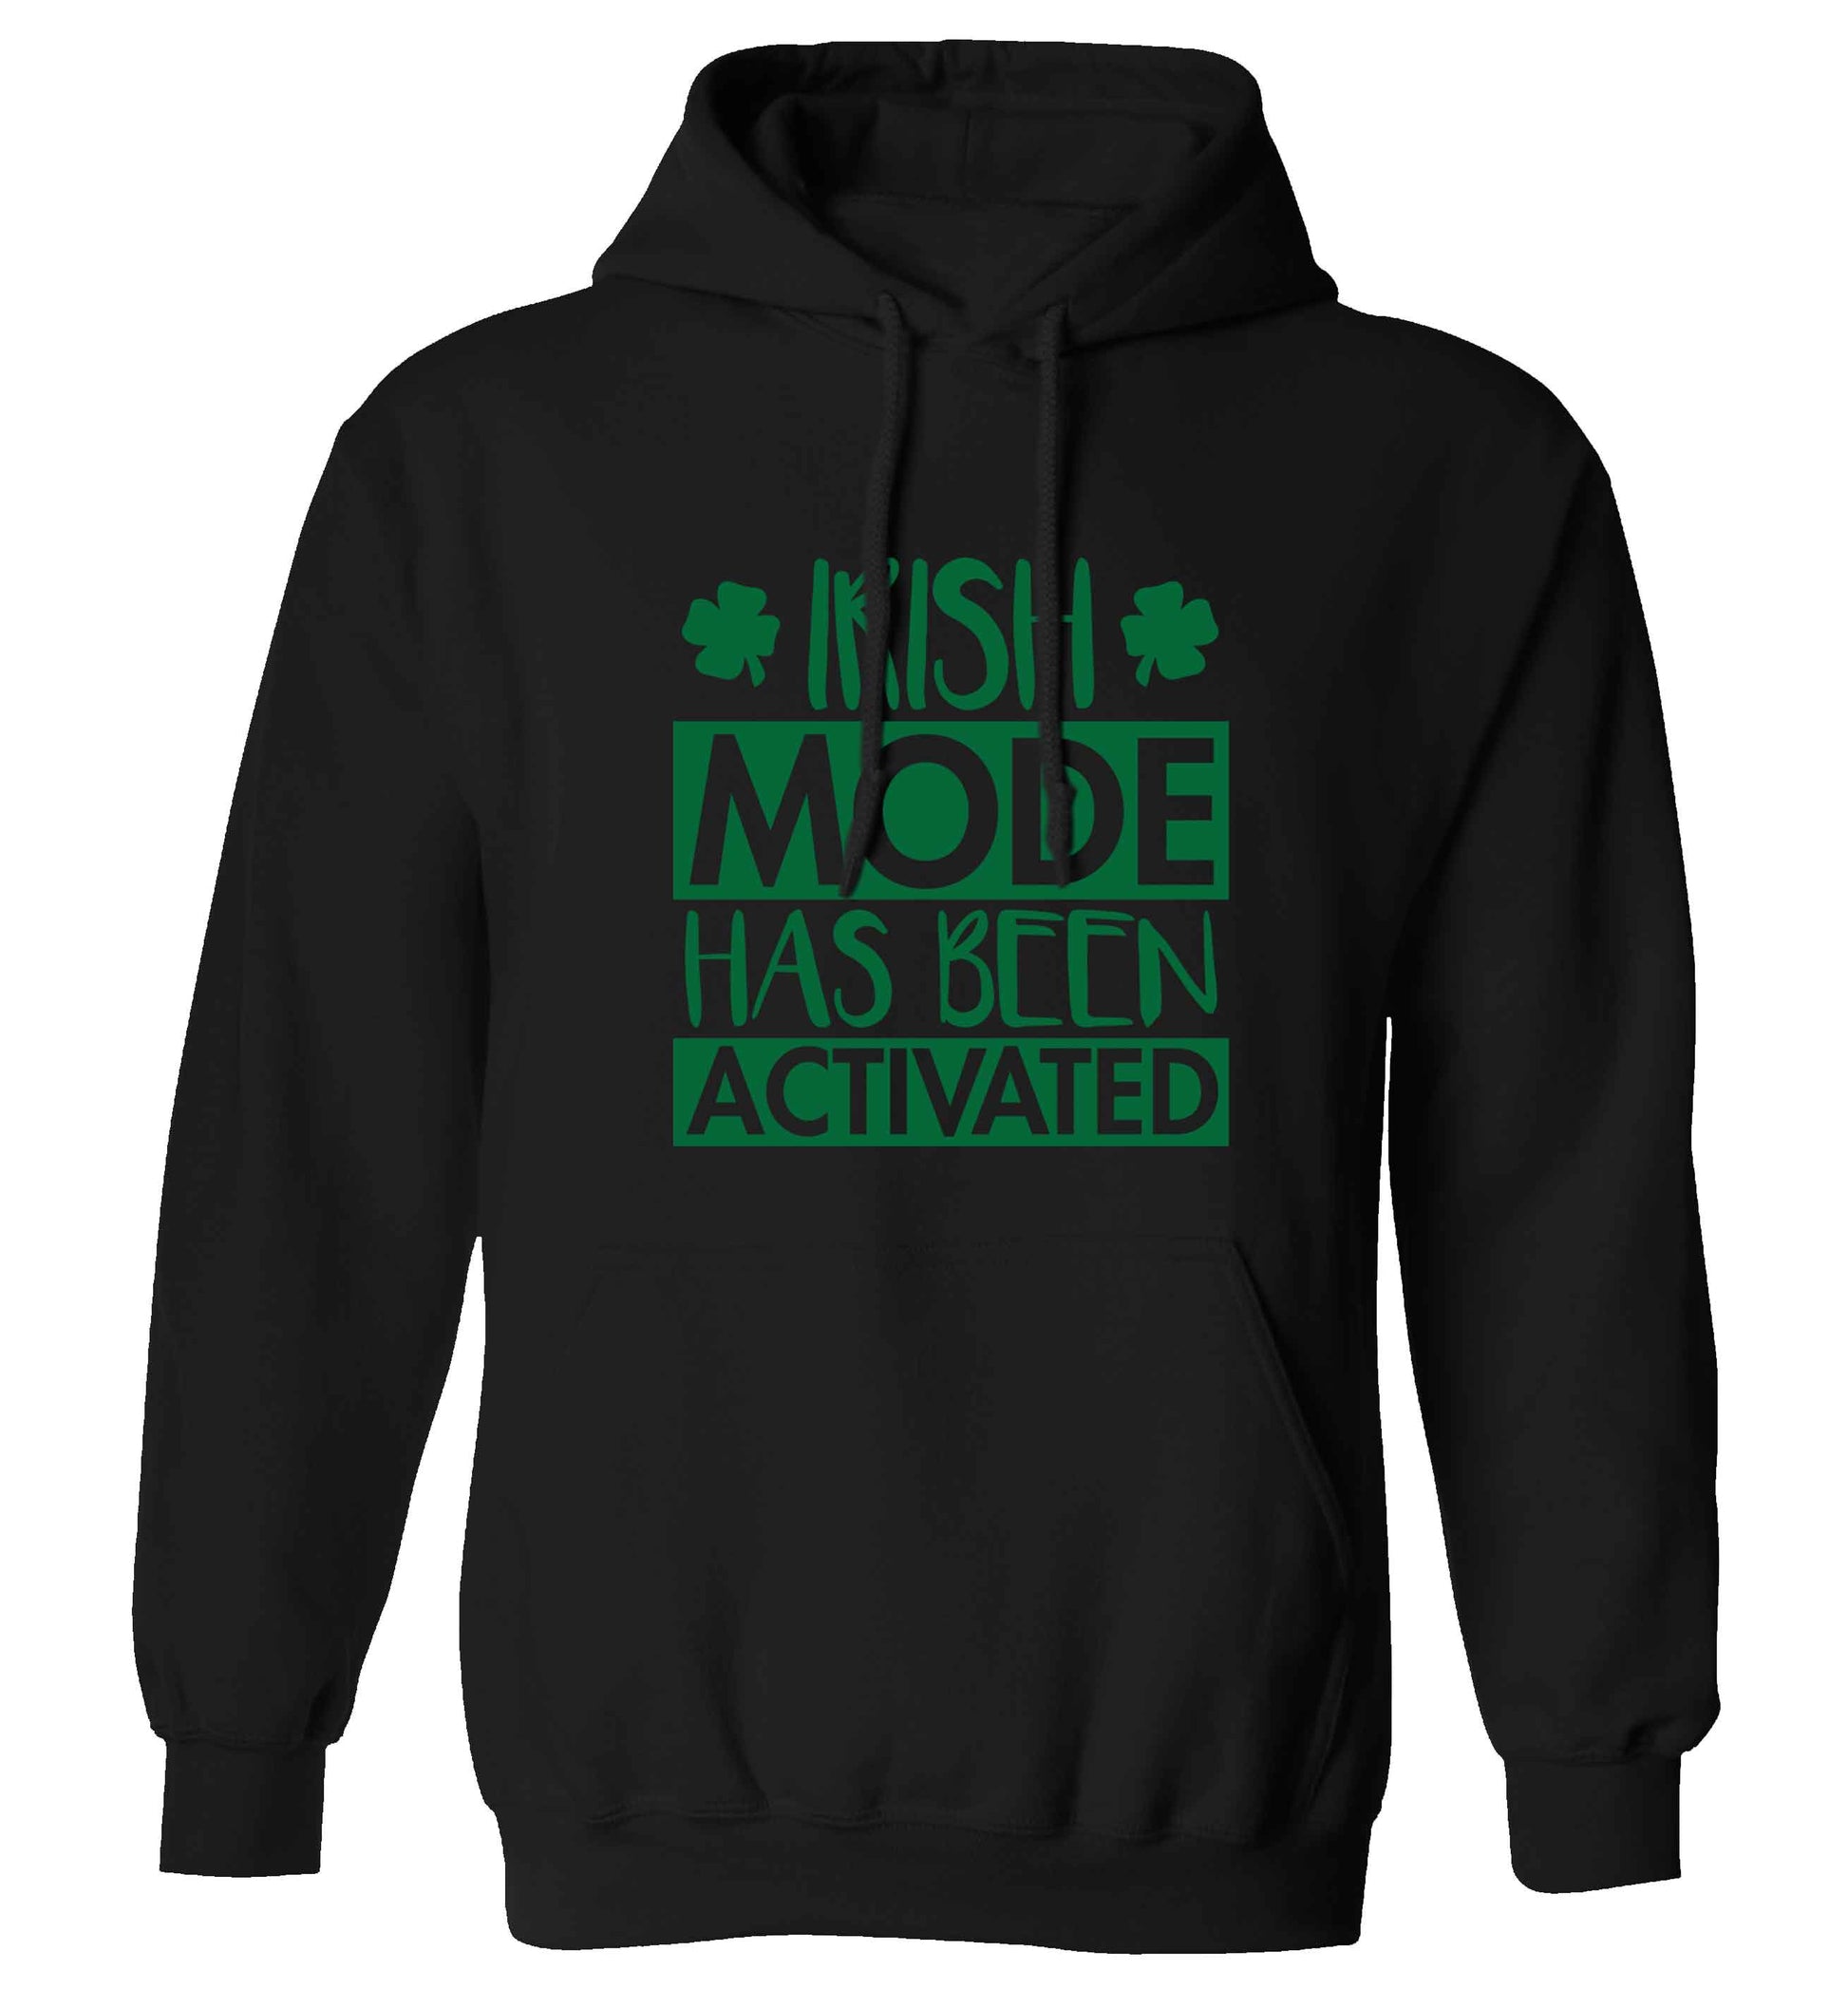 Irish mode has been activated adults unisex black hoodie 2XL